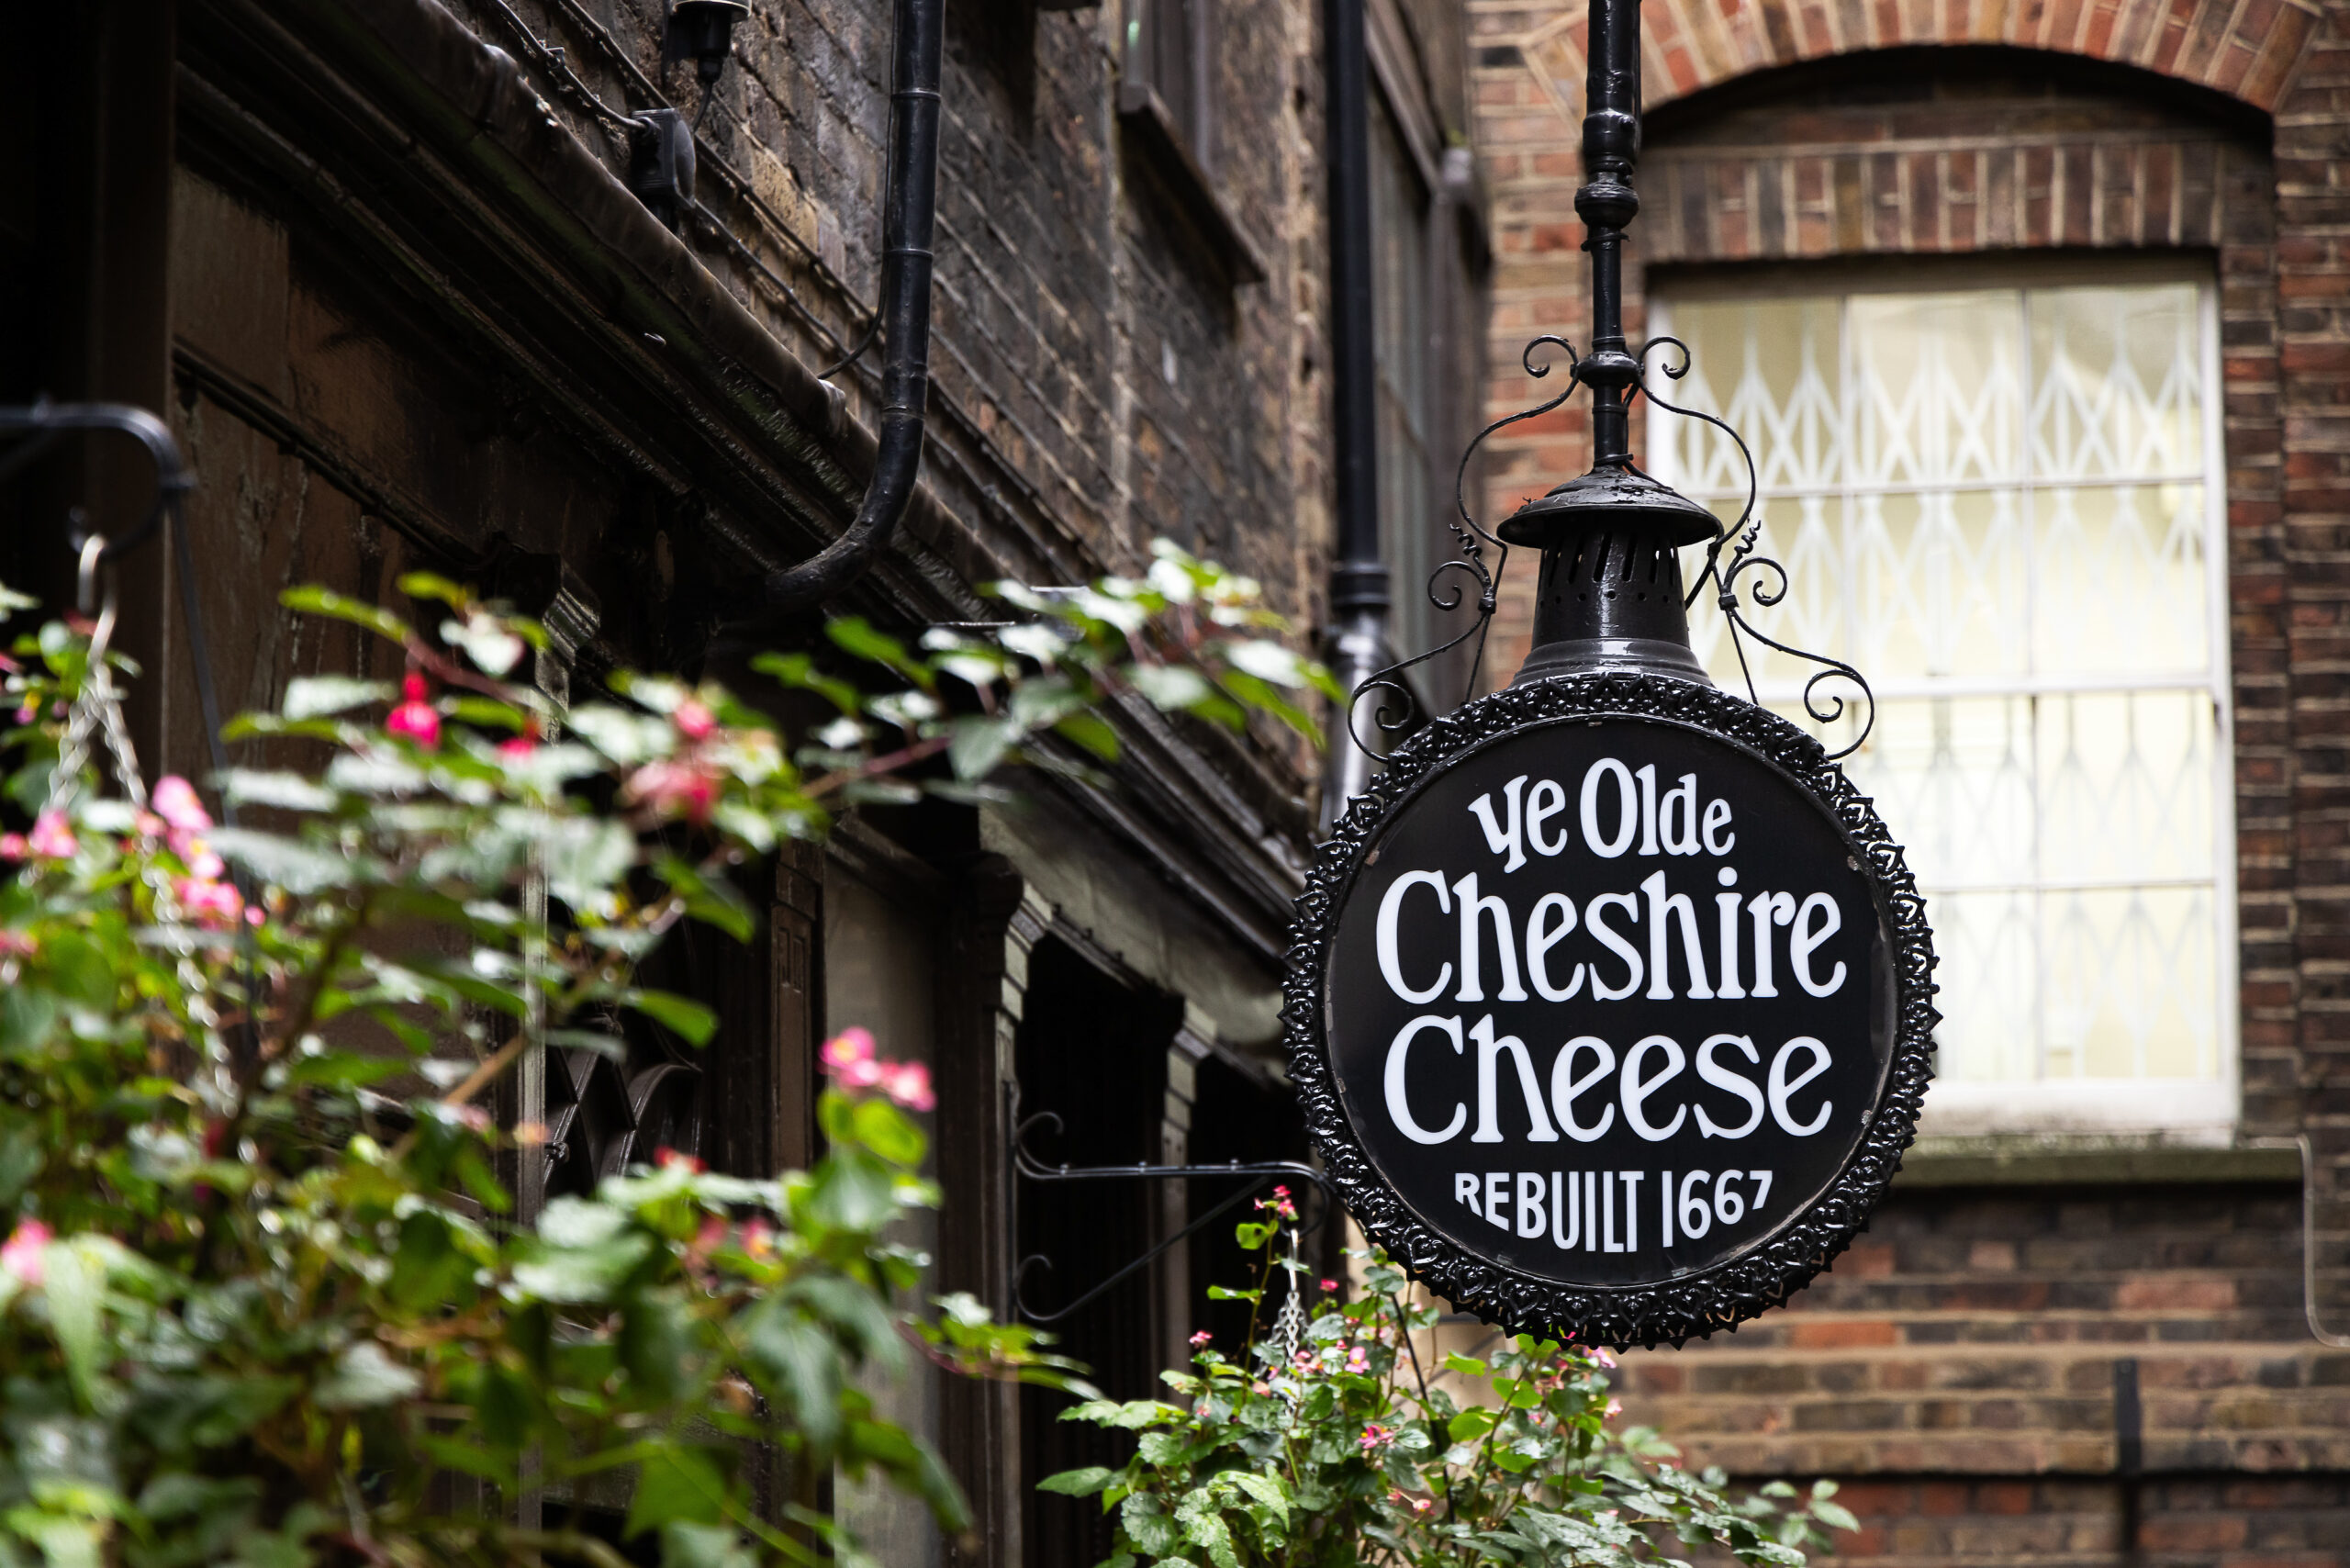 A black, round, hanging sign reading 'Ye Olde Cheshire Cheese' set against a backdrop of a red brick building and lush greenery.